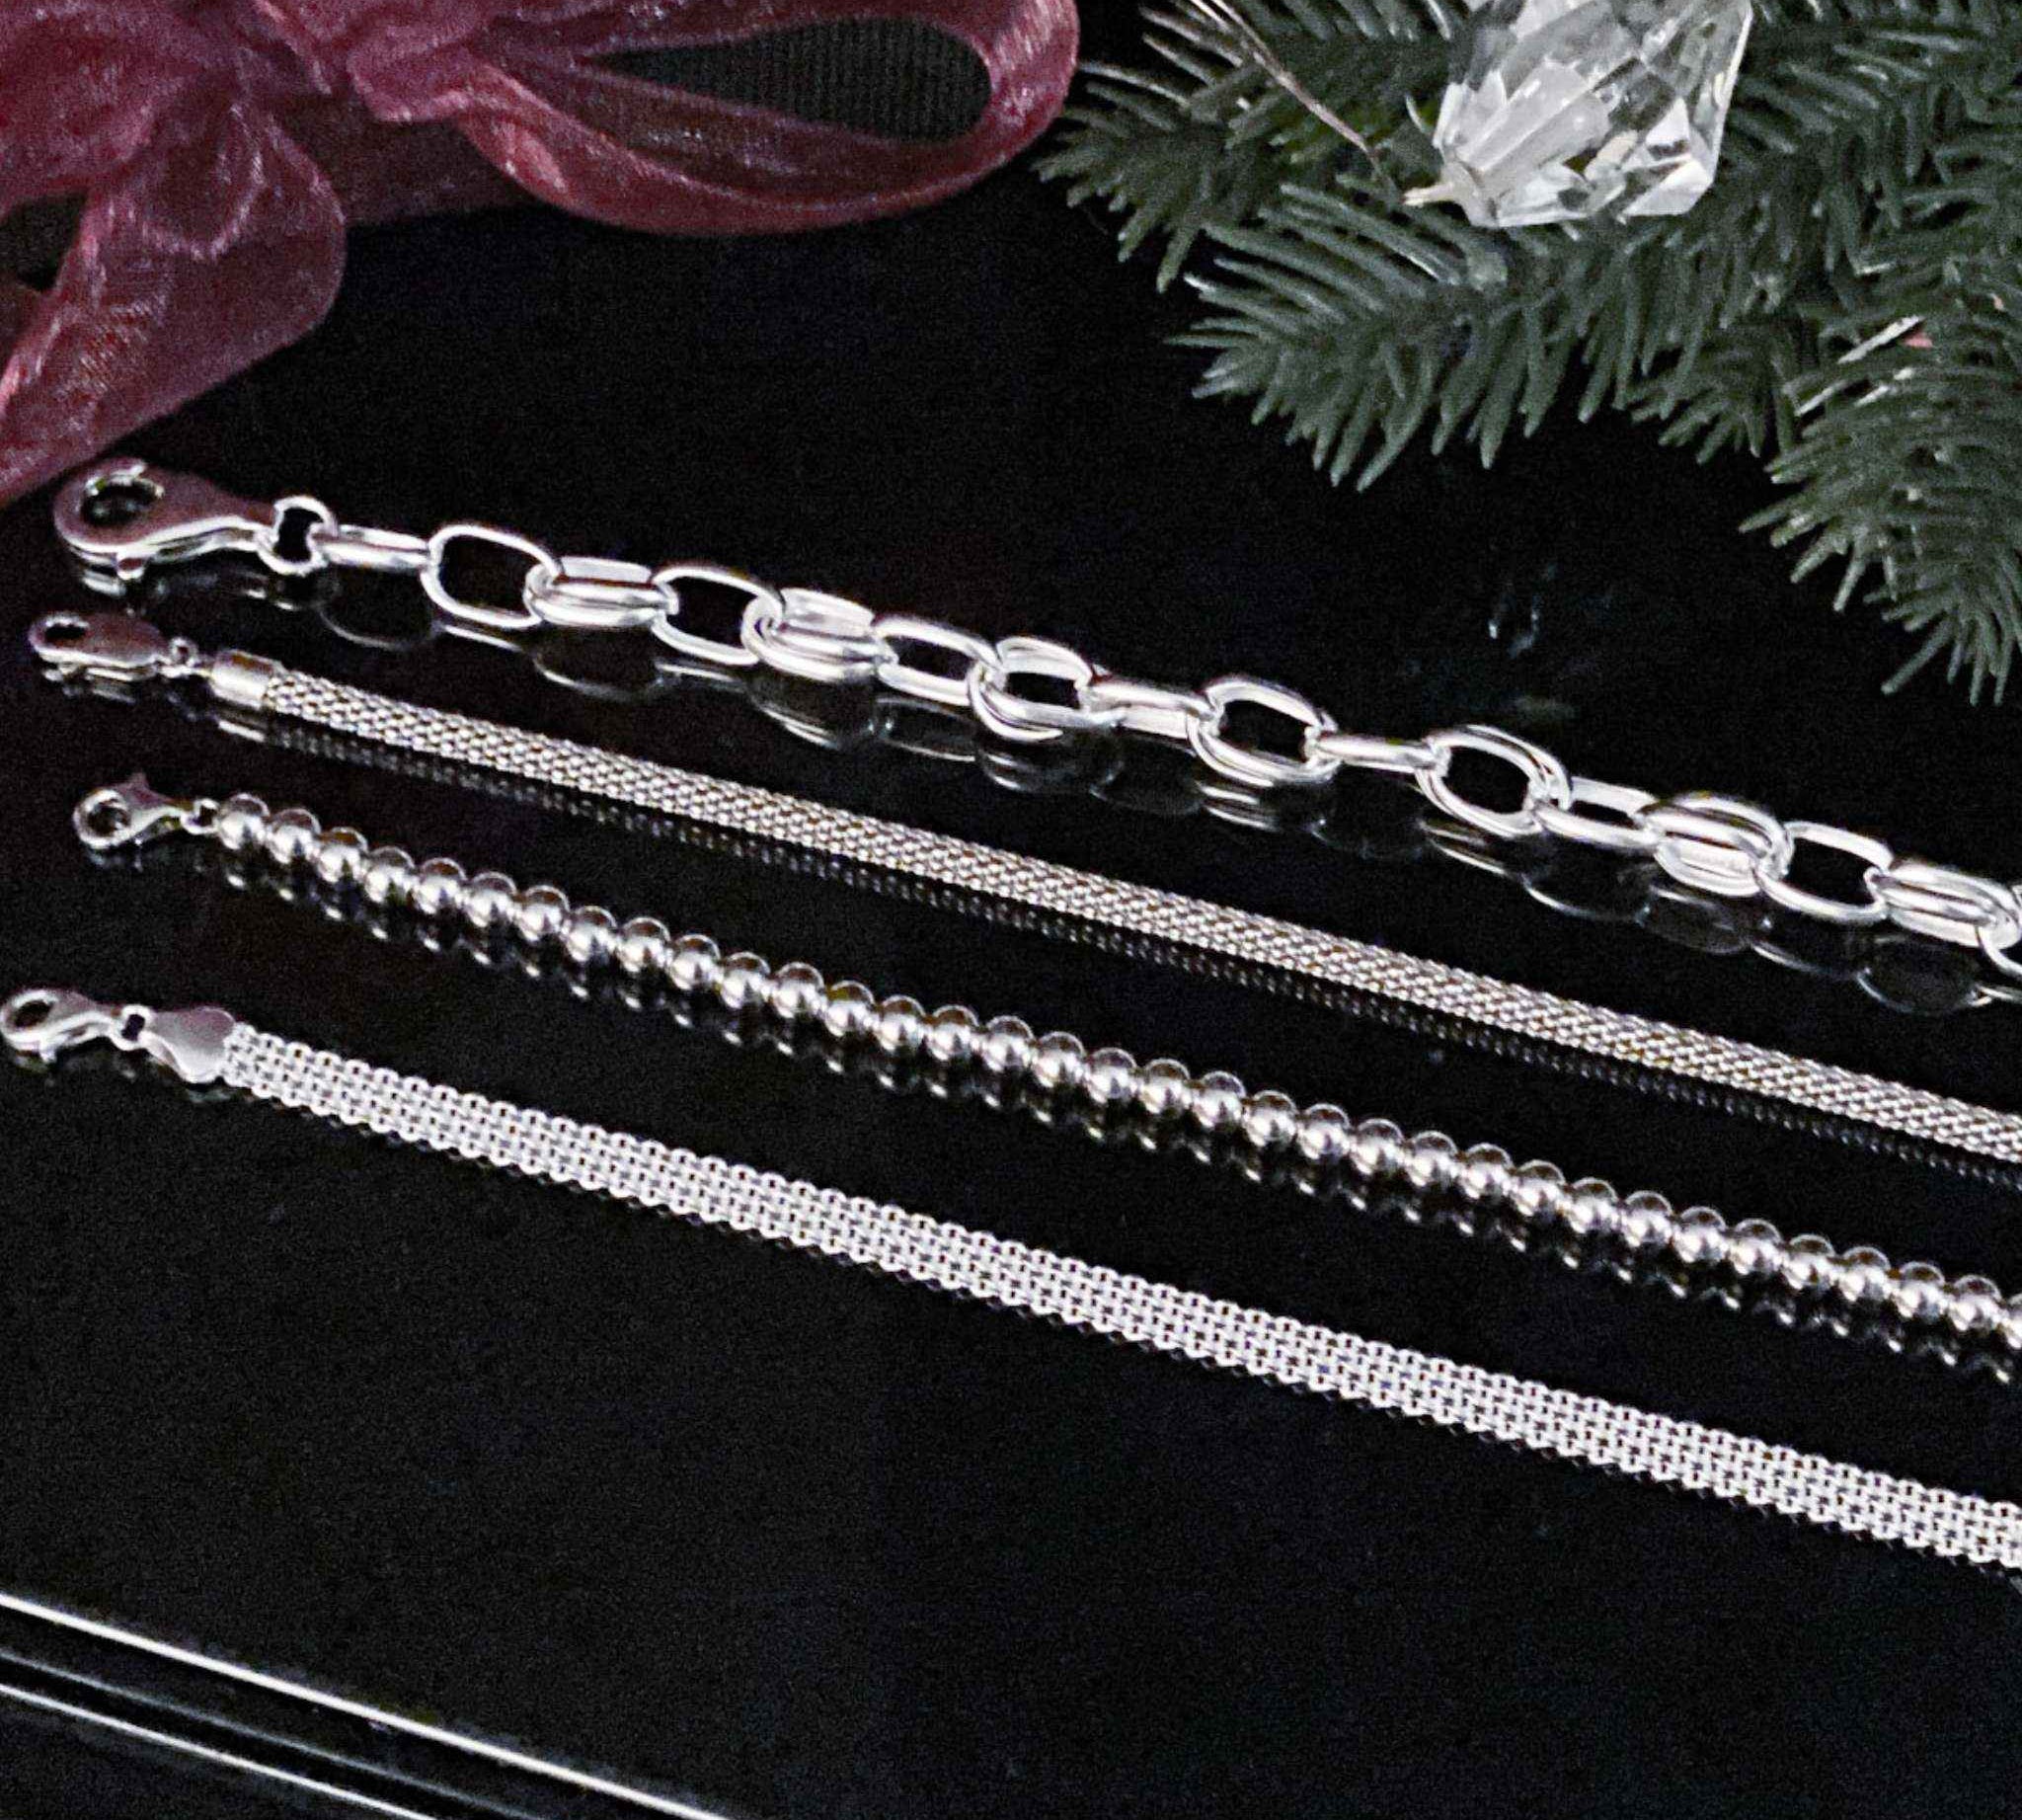 Close-up view of sterling silver rope bracelet detailing.